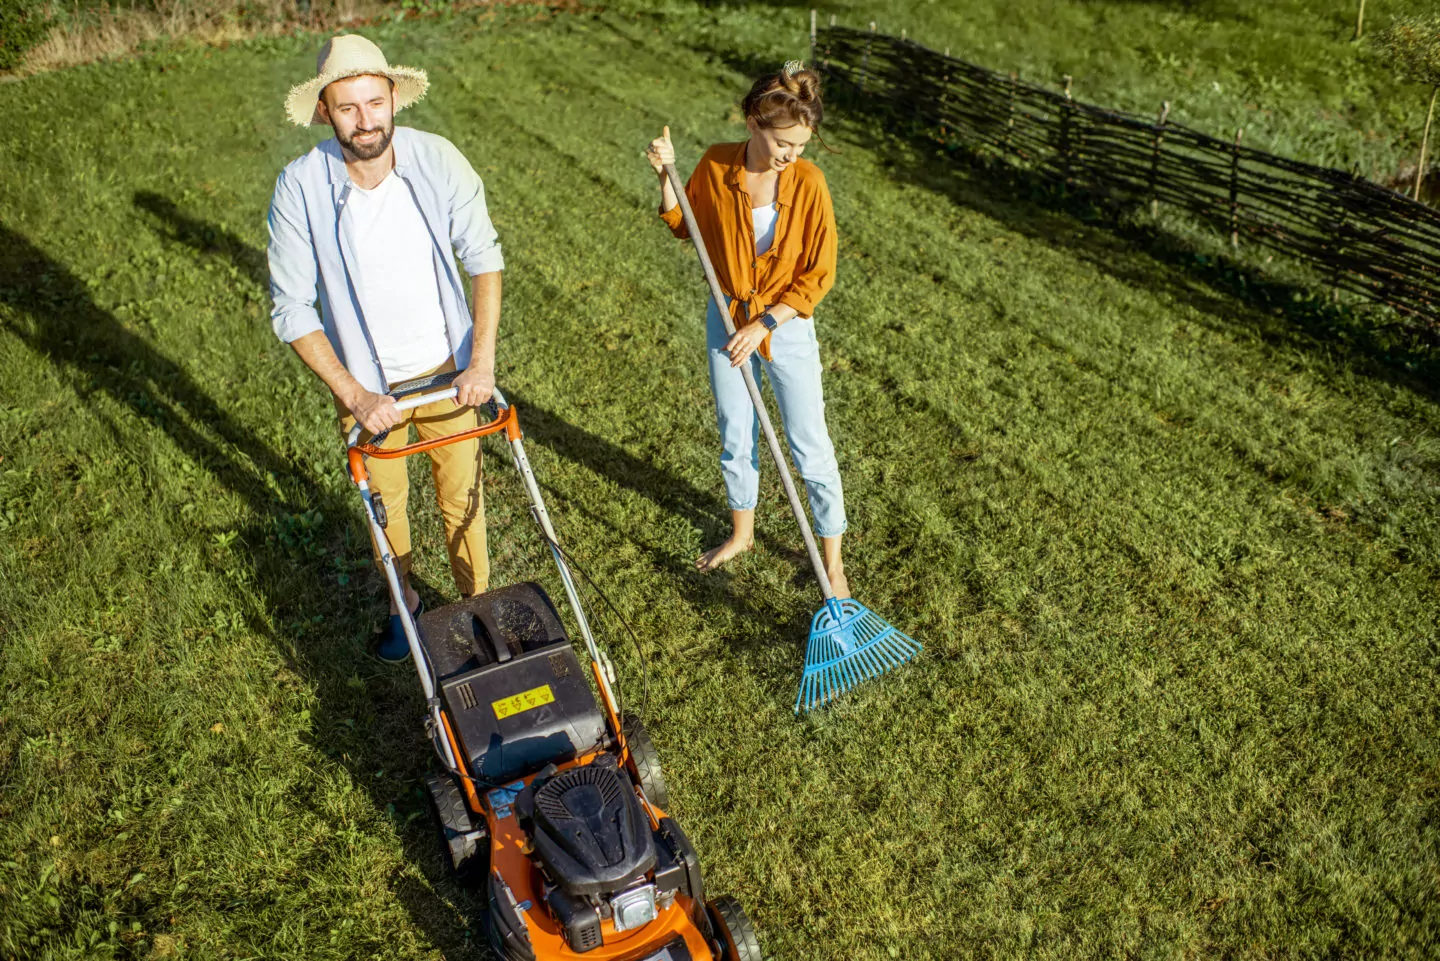 Man and woman cleaning green lawn